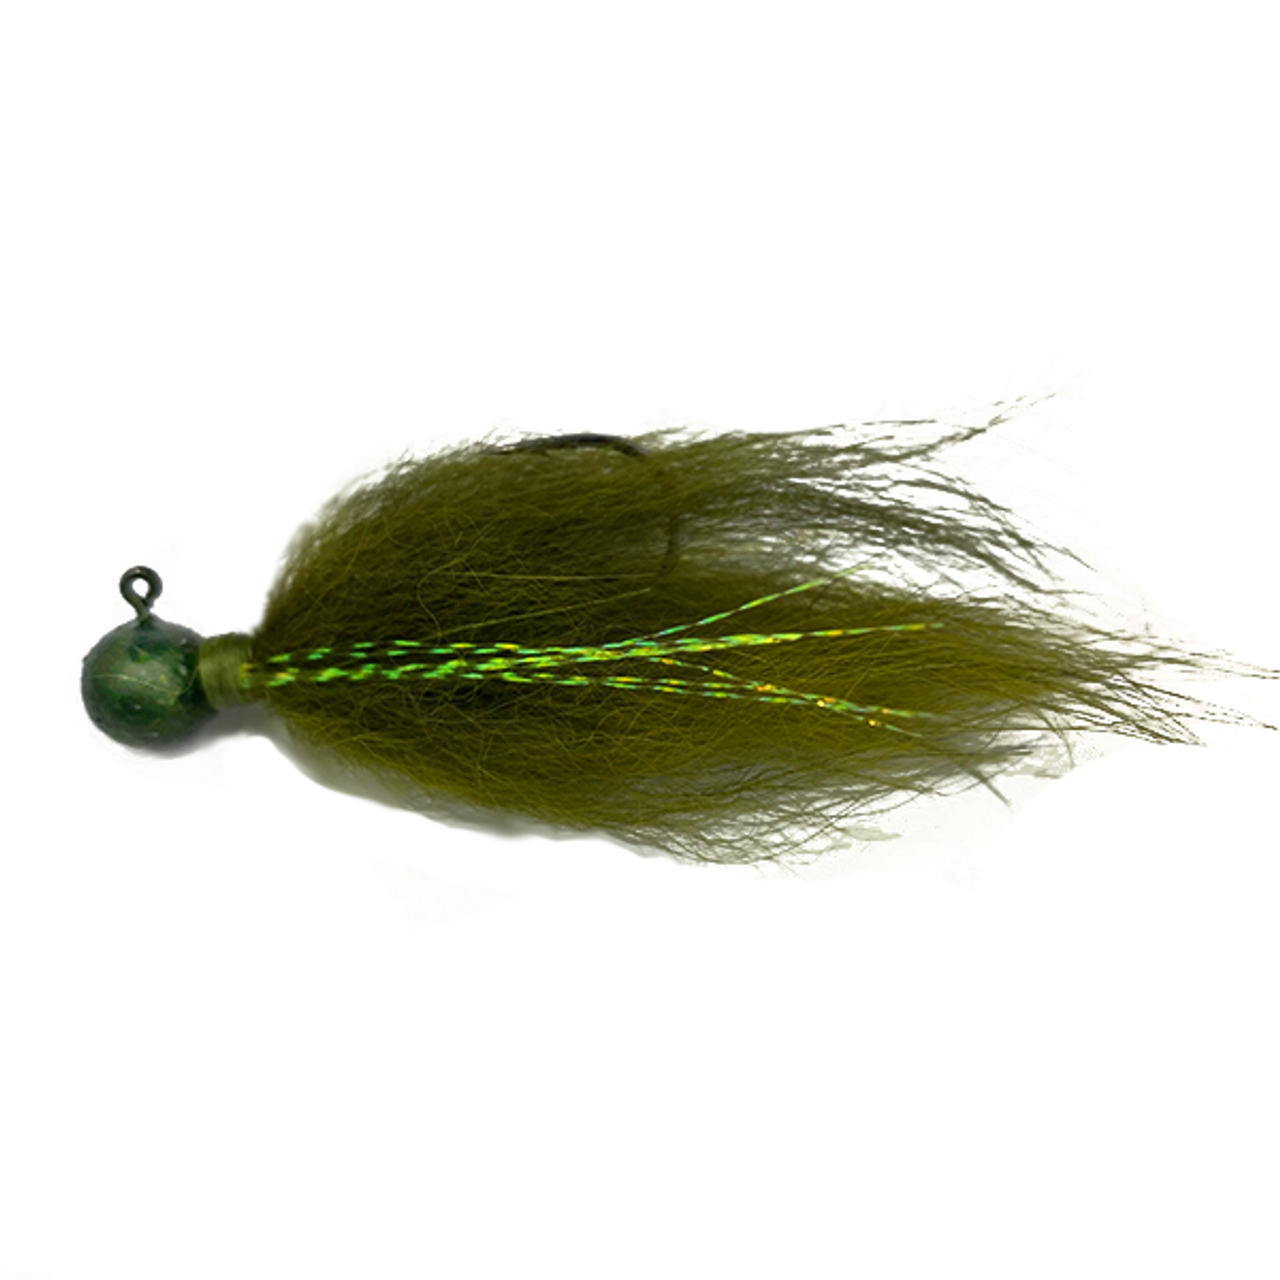 Olive Hair Jig - Bass Fishing Hair jig for smallmouth bass, walleye, and  many other game fish